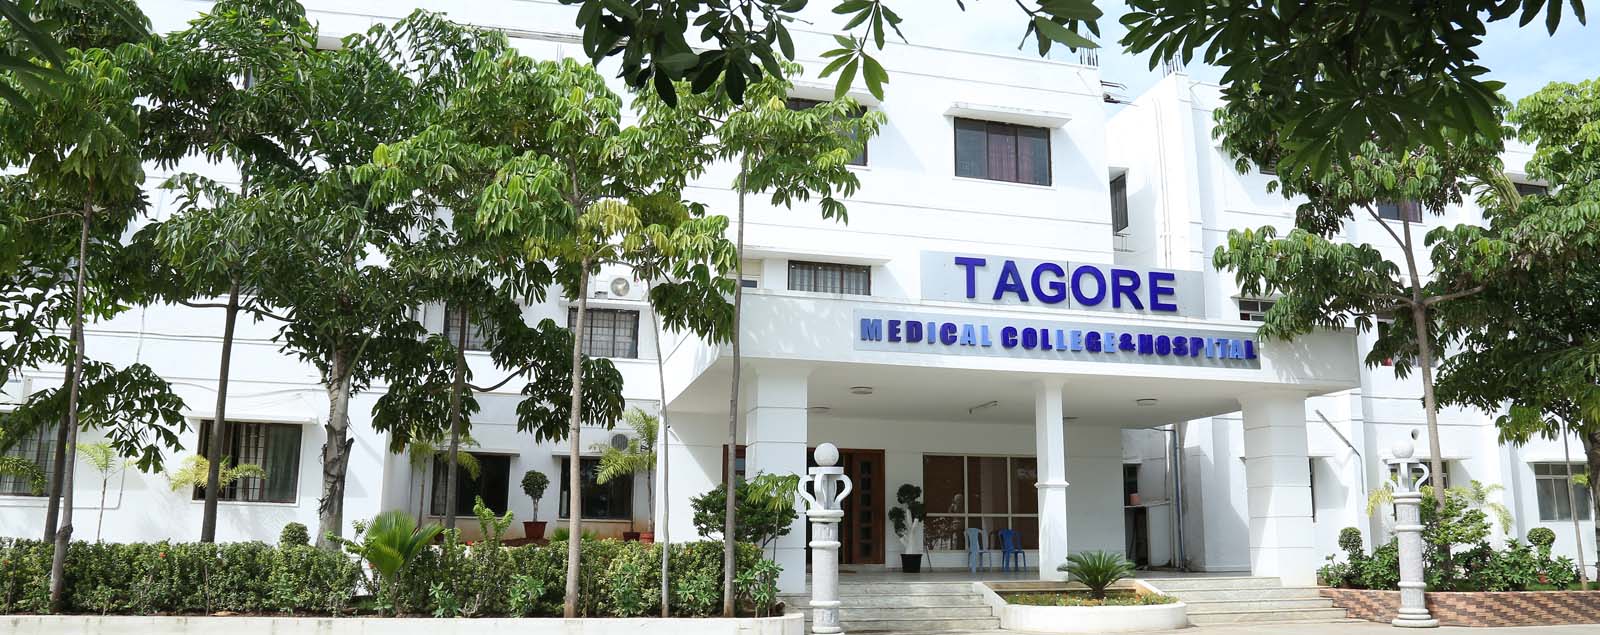 Tagore College Of Nursing Tagore Medical College and Hospital Image